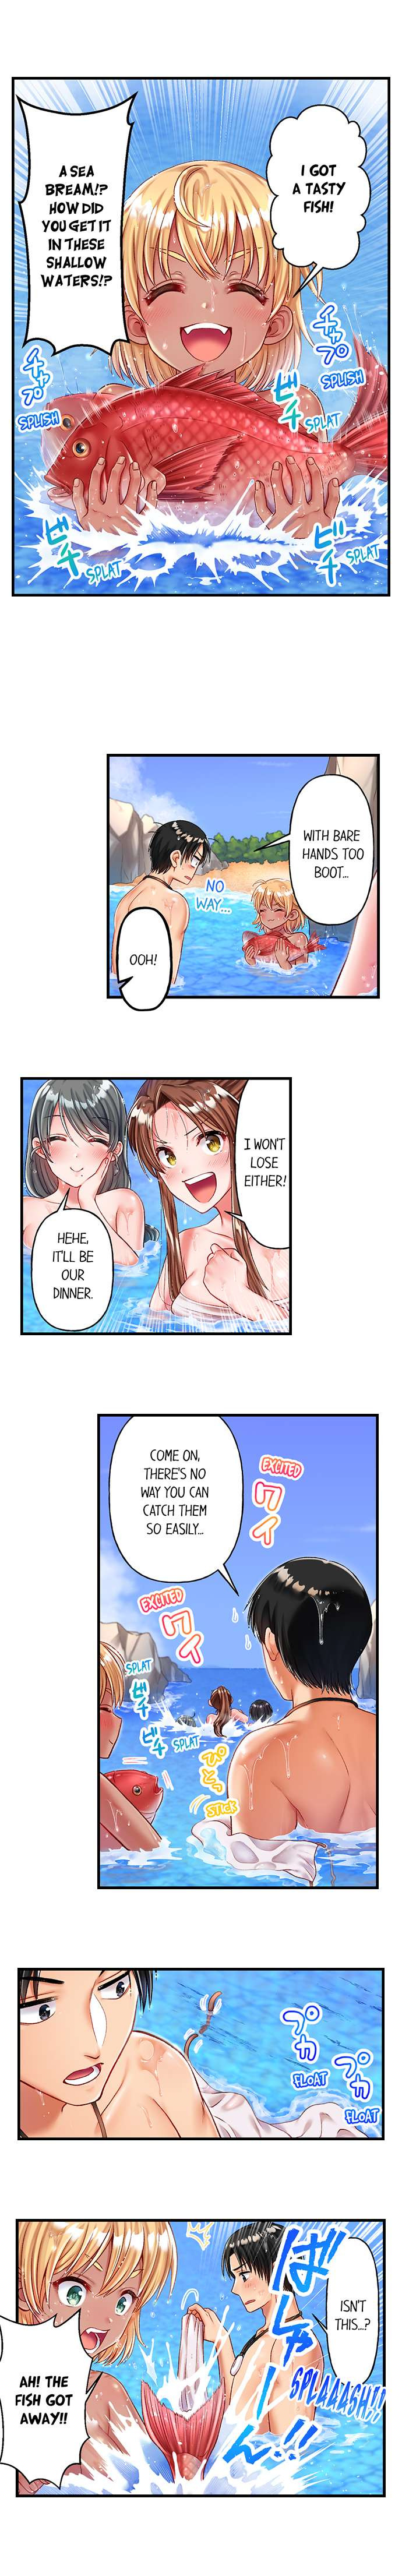 Girls’ Island: Only I Can Fuck Them All! - Chapter 14 Page 7